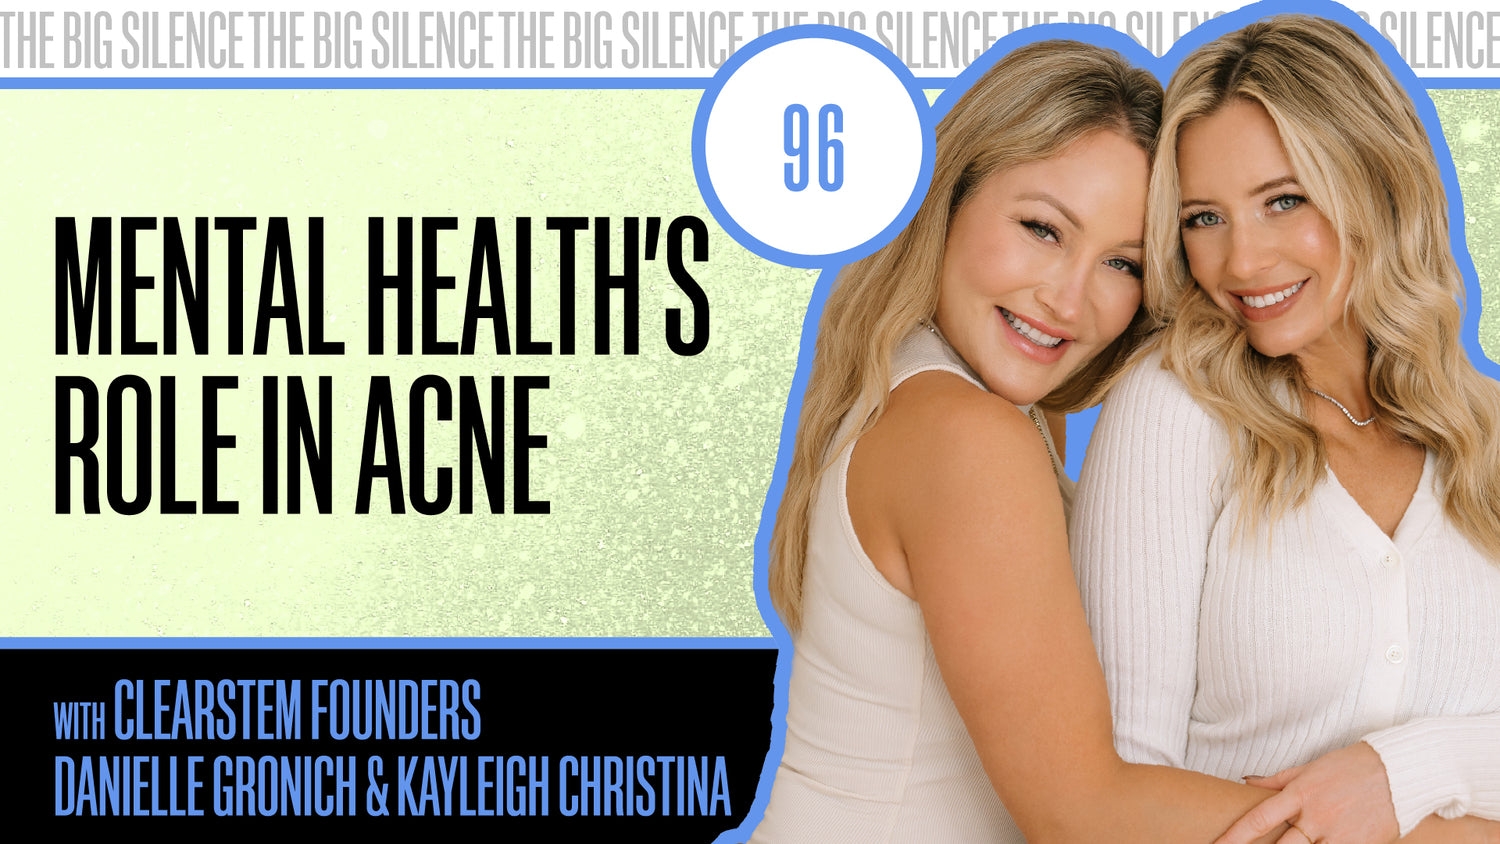 96. EMBRACE IMPERFECTION: HIGHLIGHTING MENTAL HEALTH’S ROLE IN ACNE WITH CLEARSTEM FOUNDERS DANIELLE GRONICH & KAYLEIGH CHRISTINA